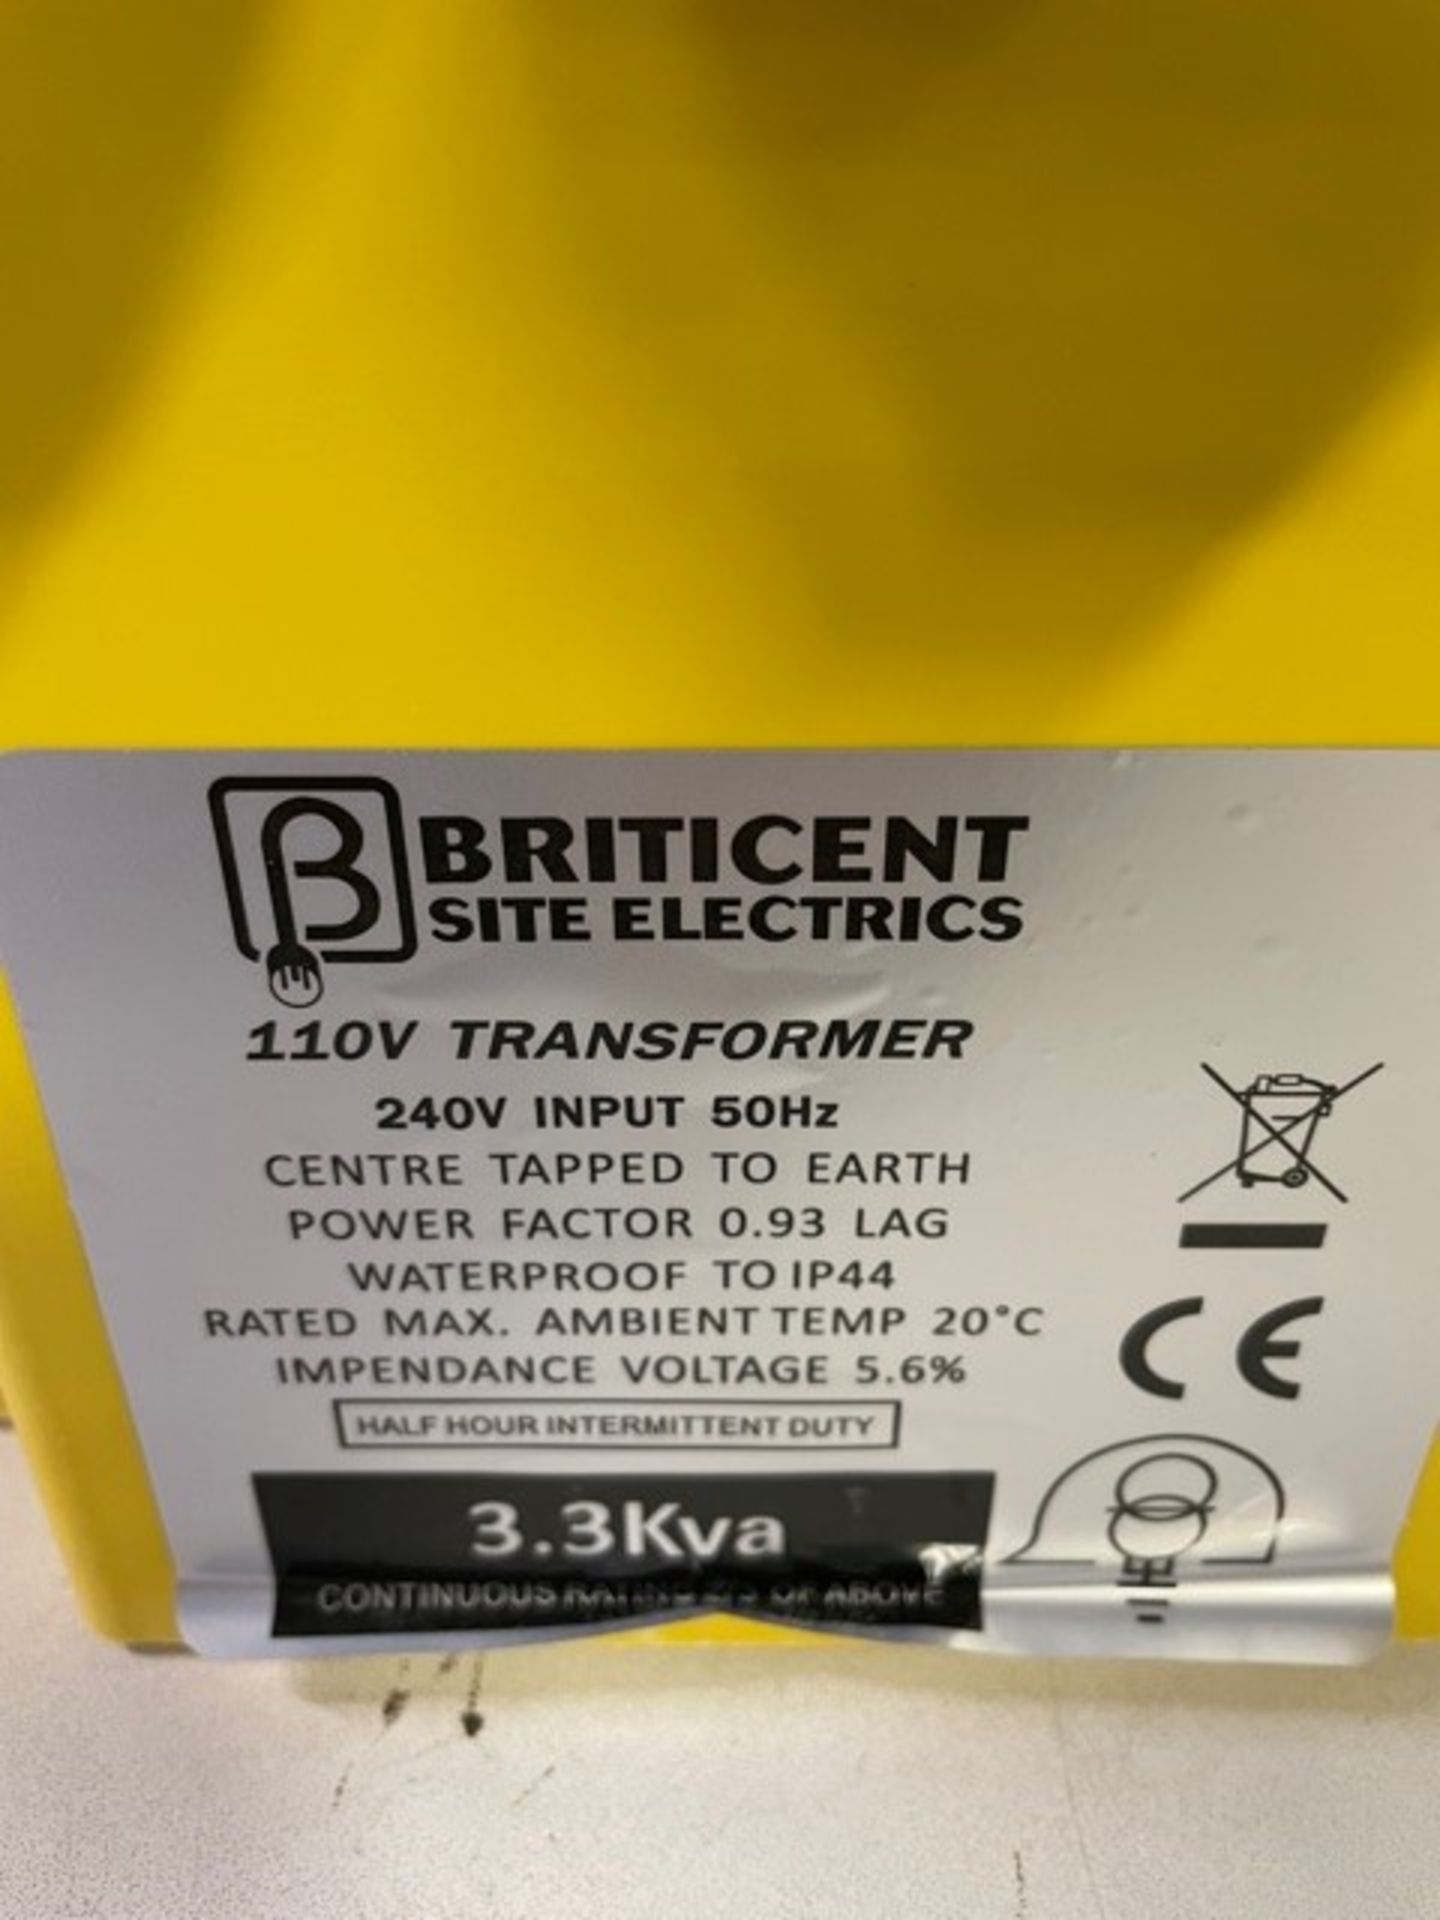 Briticent Site Electrics Portable Tool Transformer - Image 2 of 4